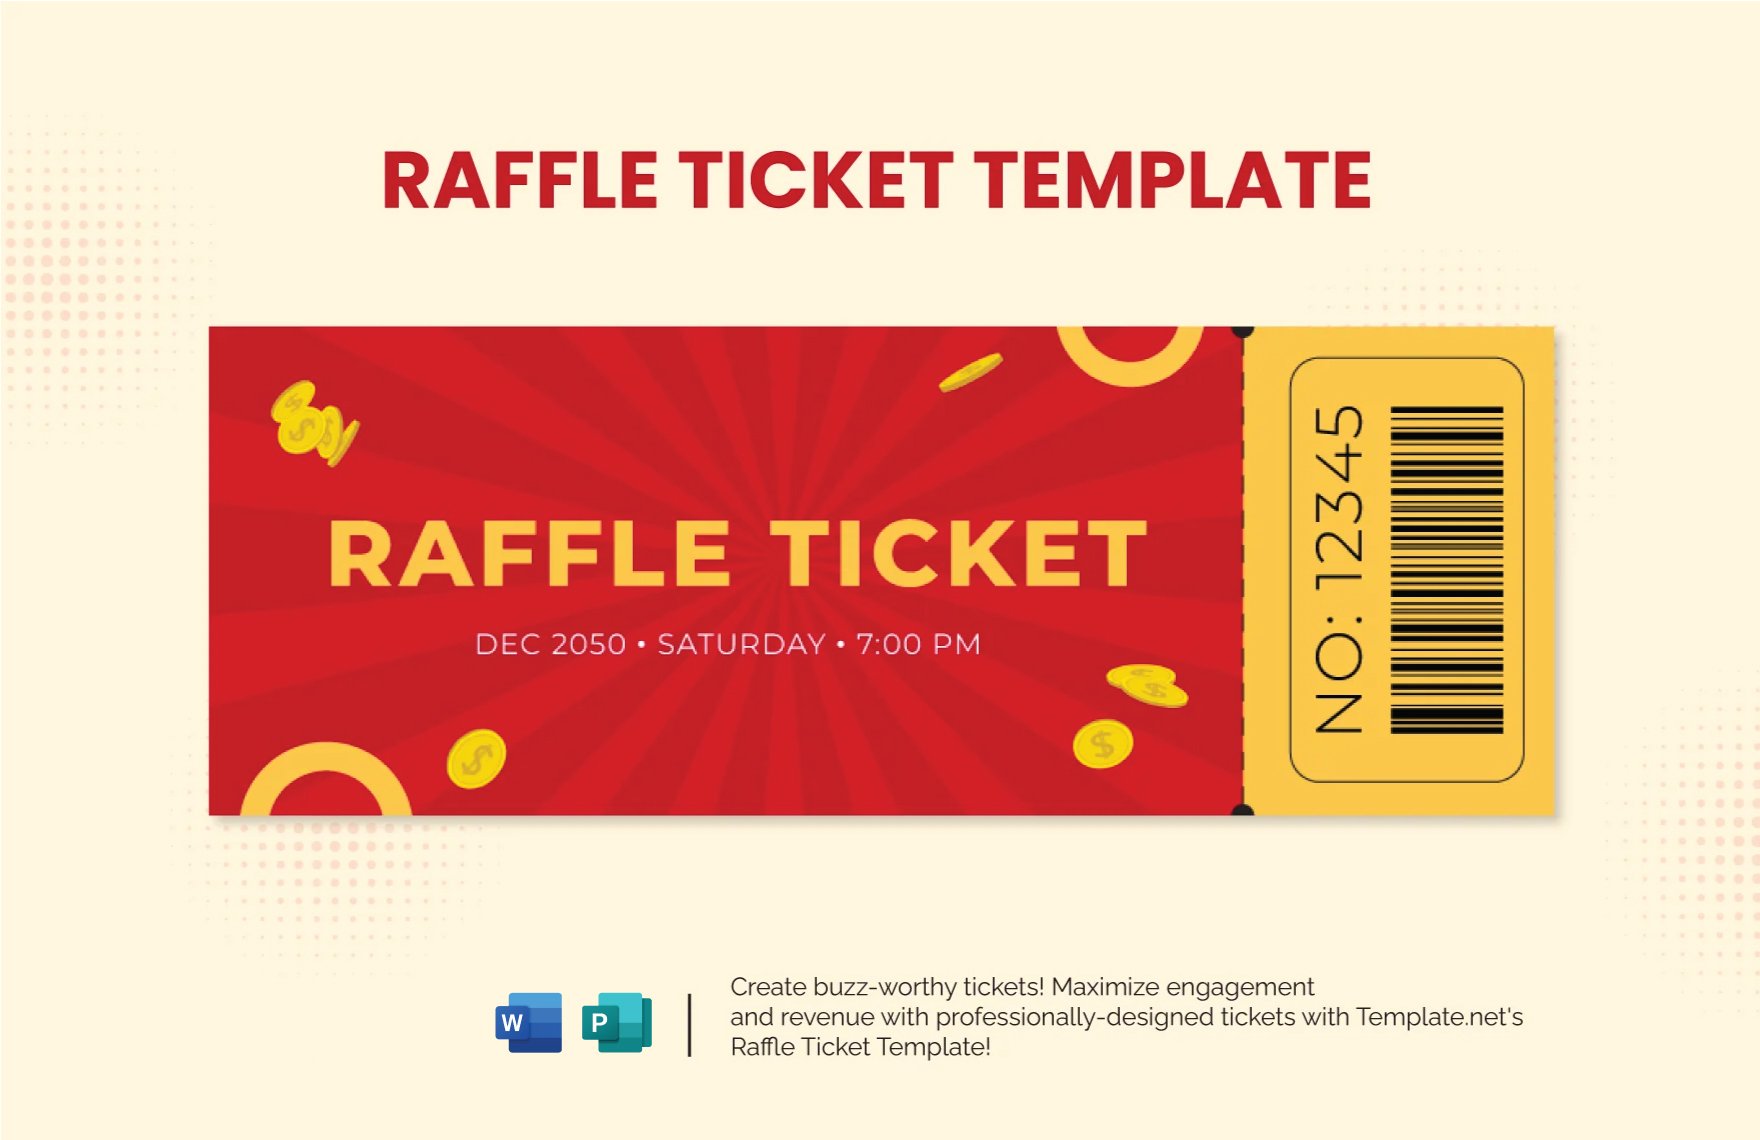 Raffle Ticket Template in Word, Publisher